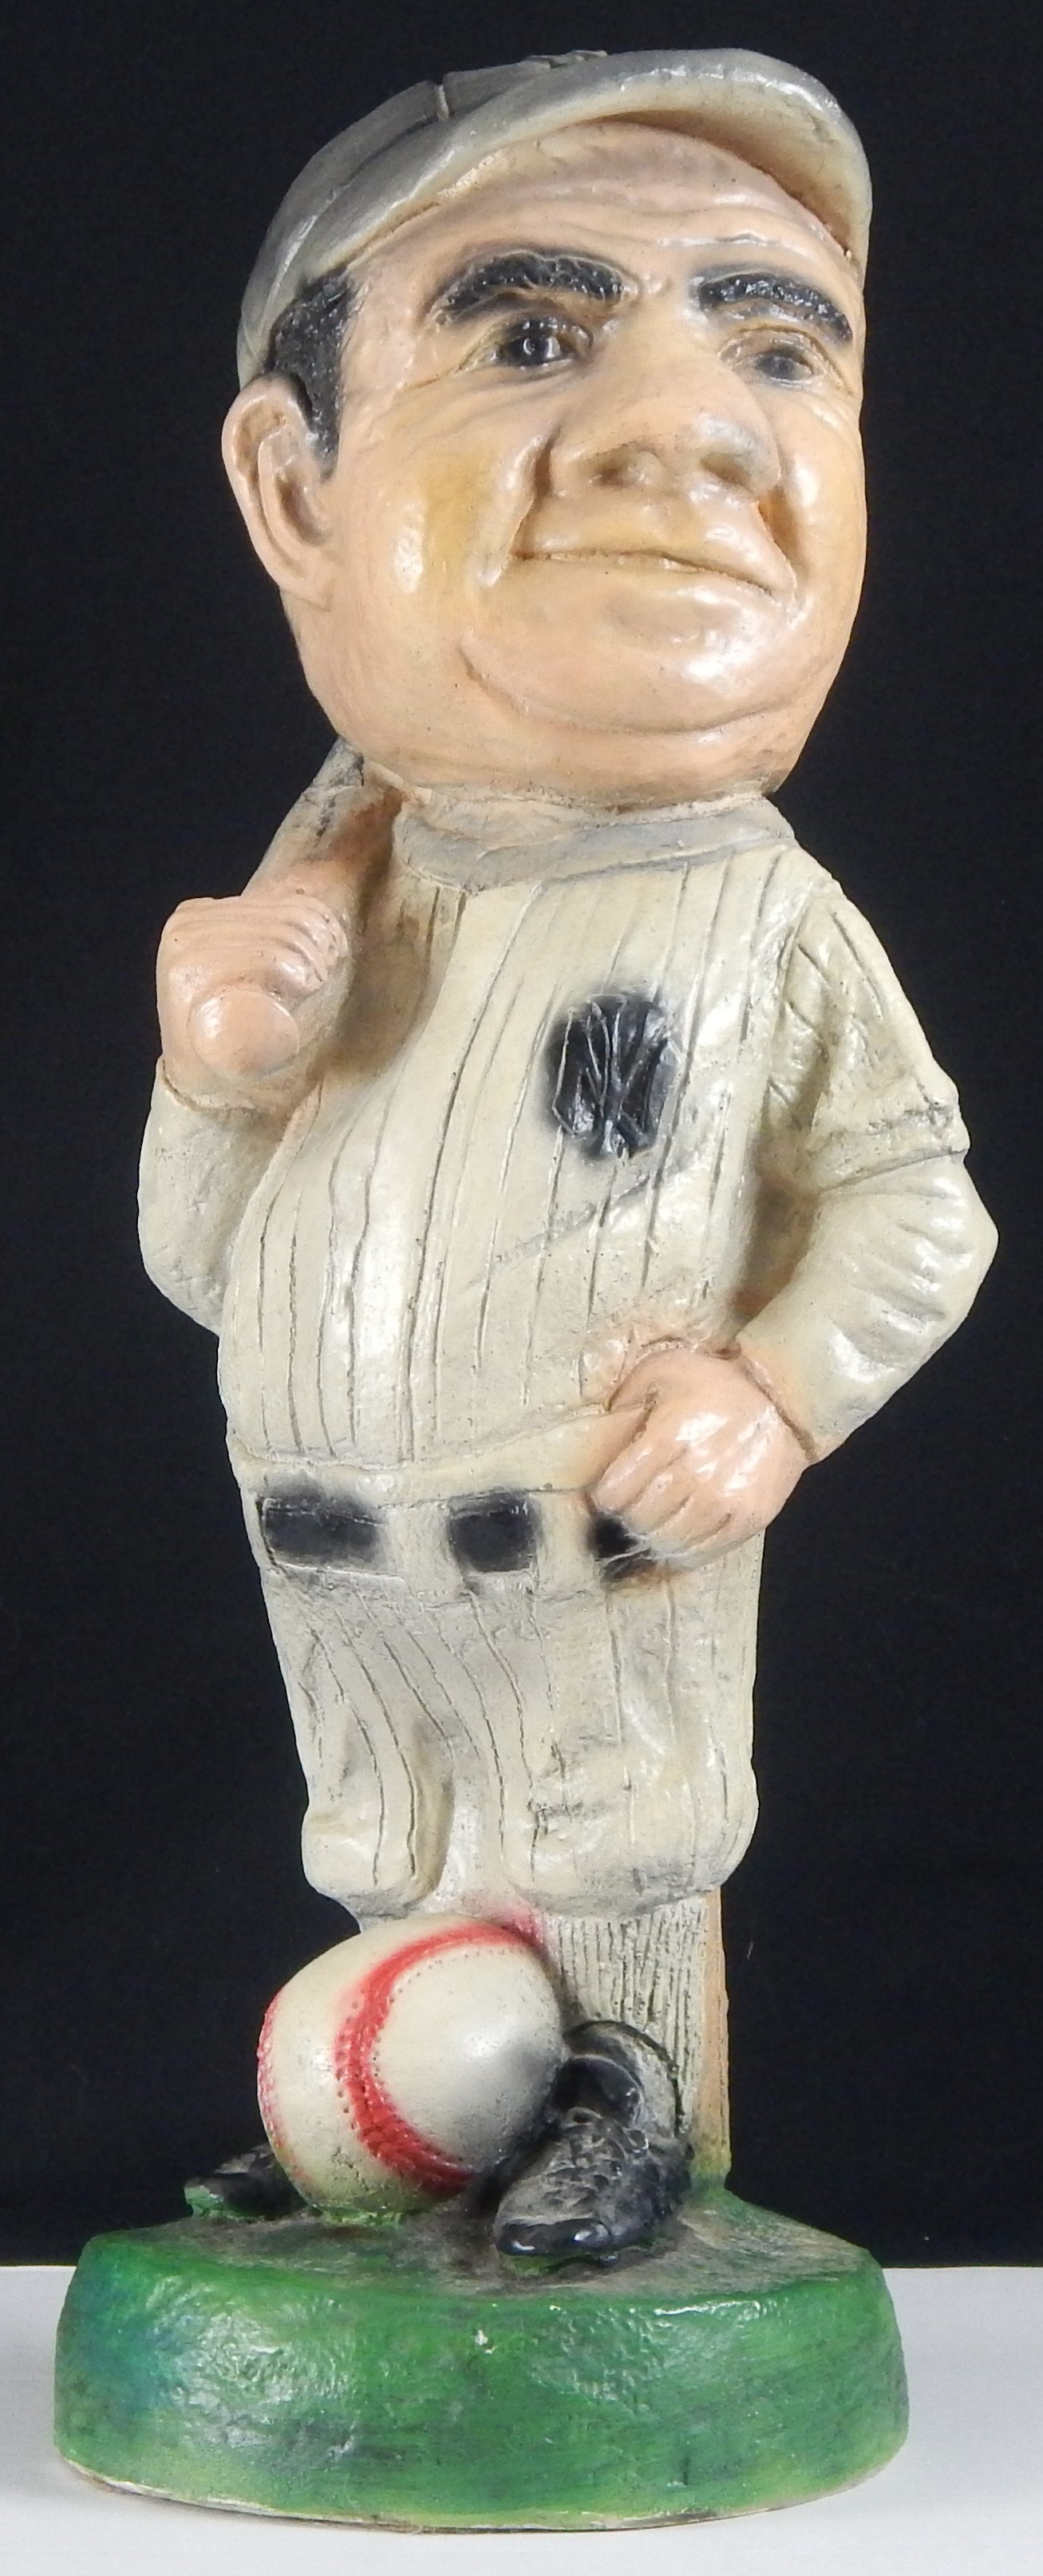 Babe Ruth - 1960s Babe Ruth Scarce Esco-Style Statue with Coin Bank (23" tall)